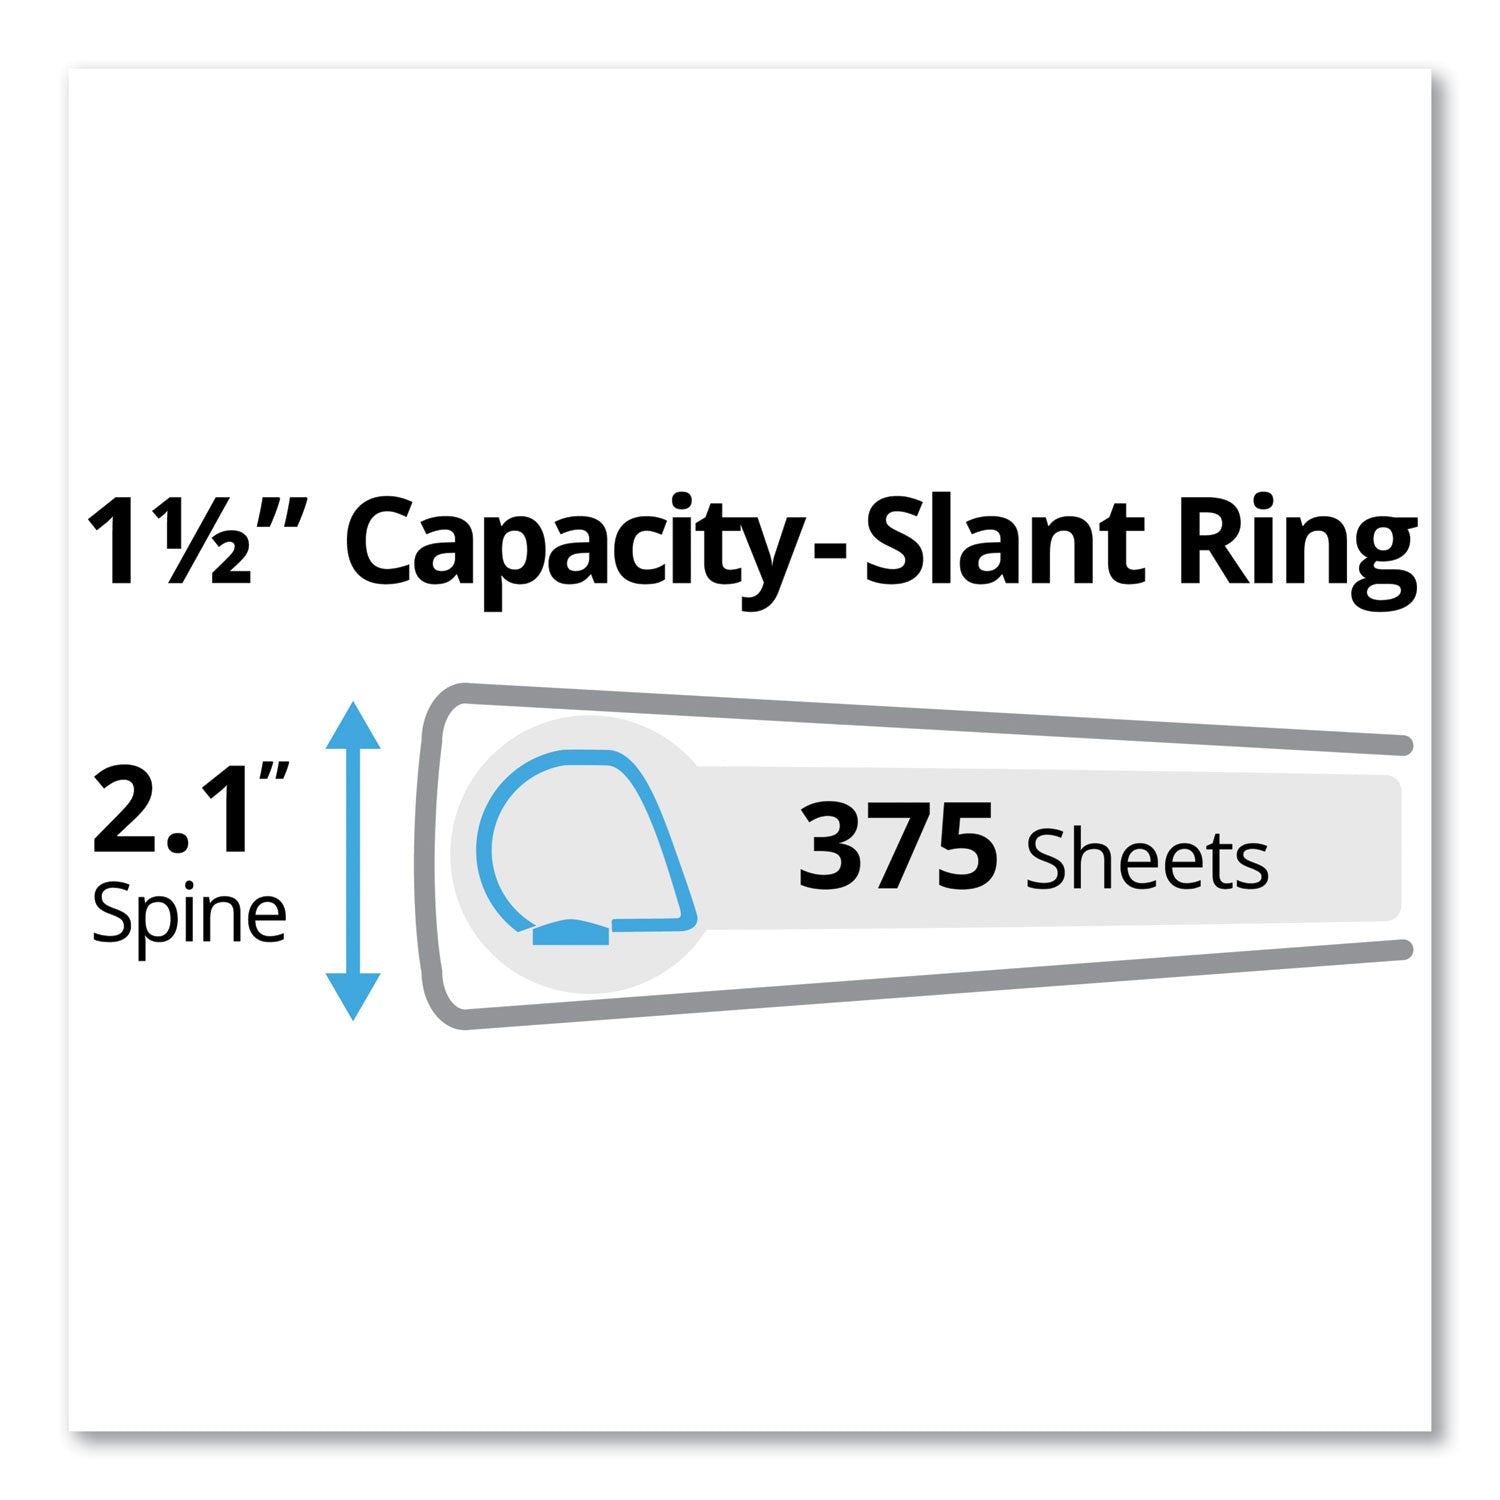 Durable Non-View Binder with DuraHinge and Slant Rings, 3 Rings, 1.5" Capacity, 11 x 8.5, Blue - 